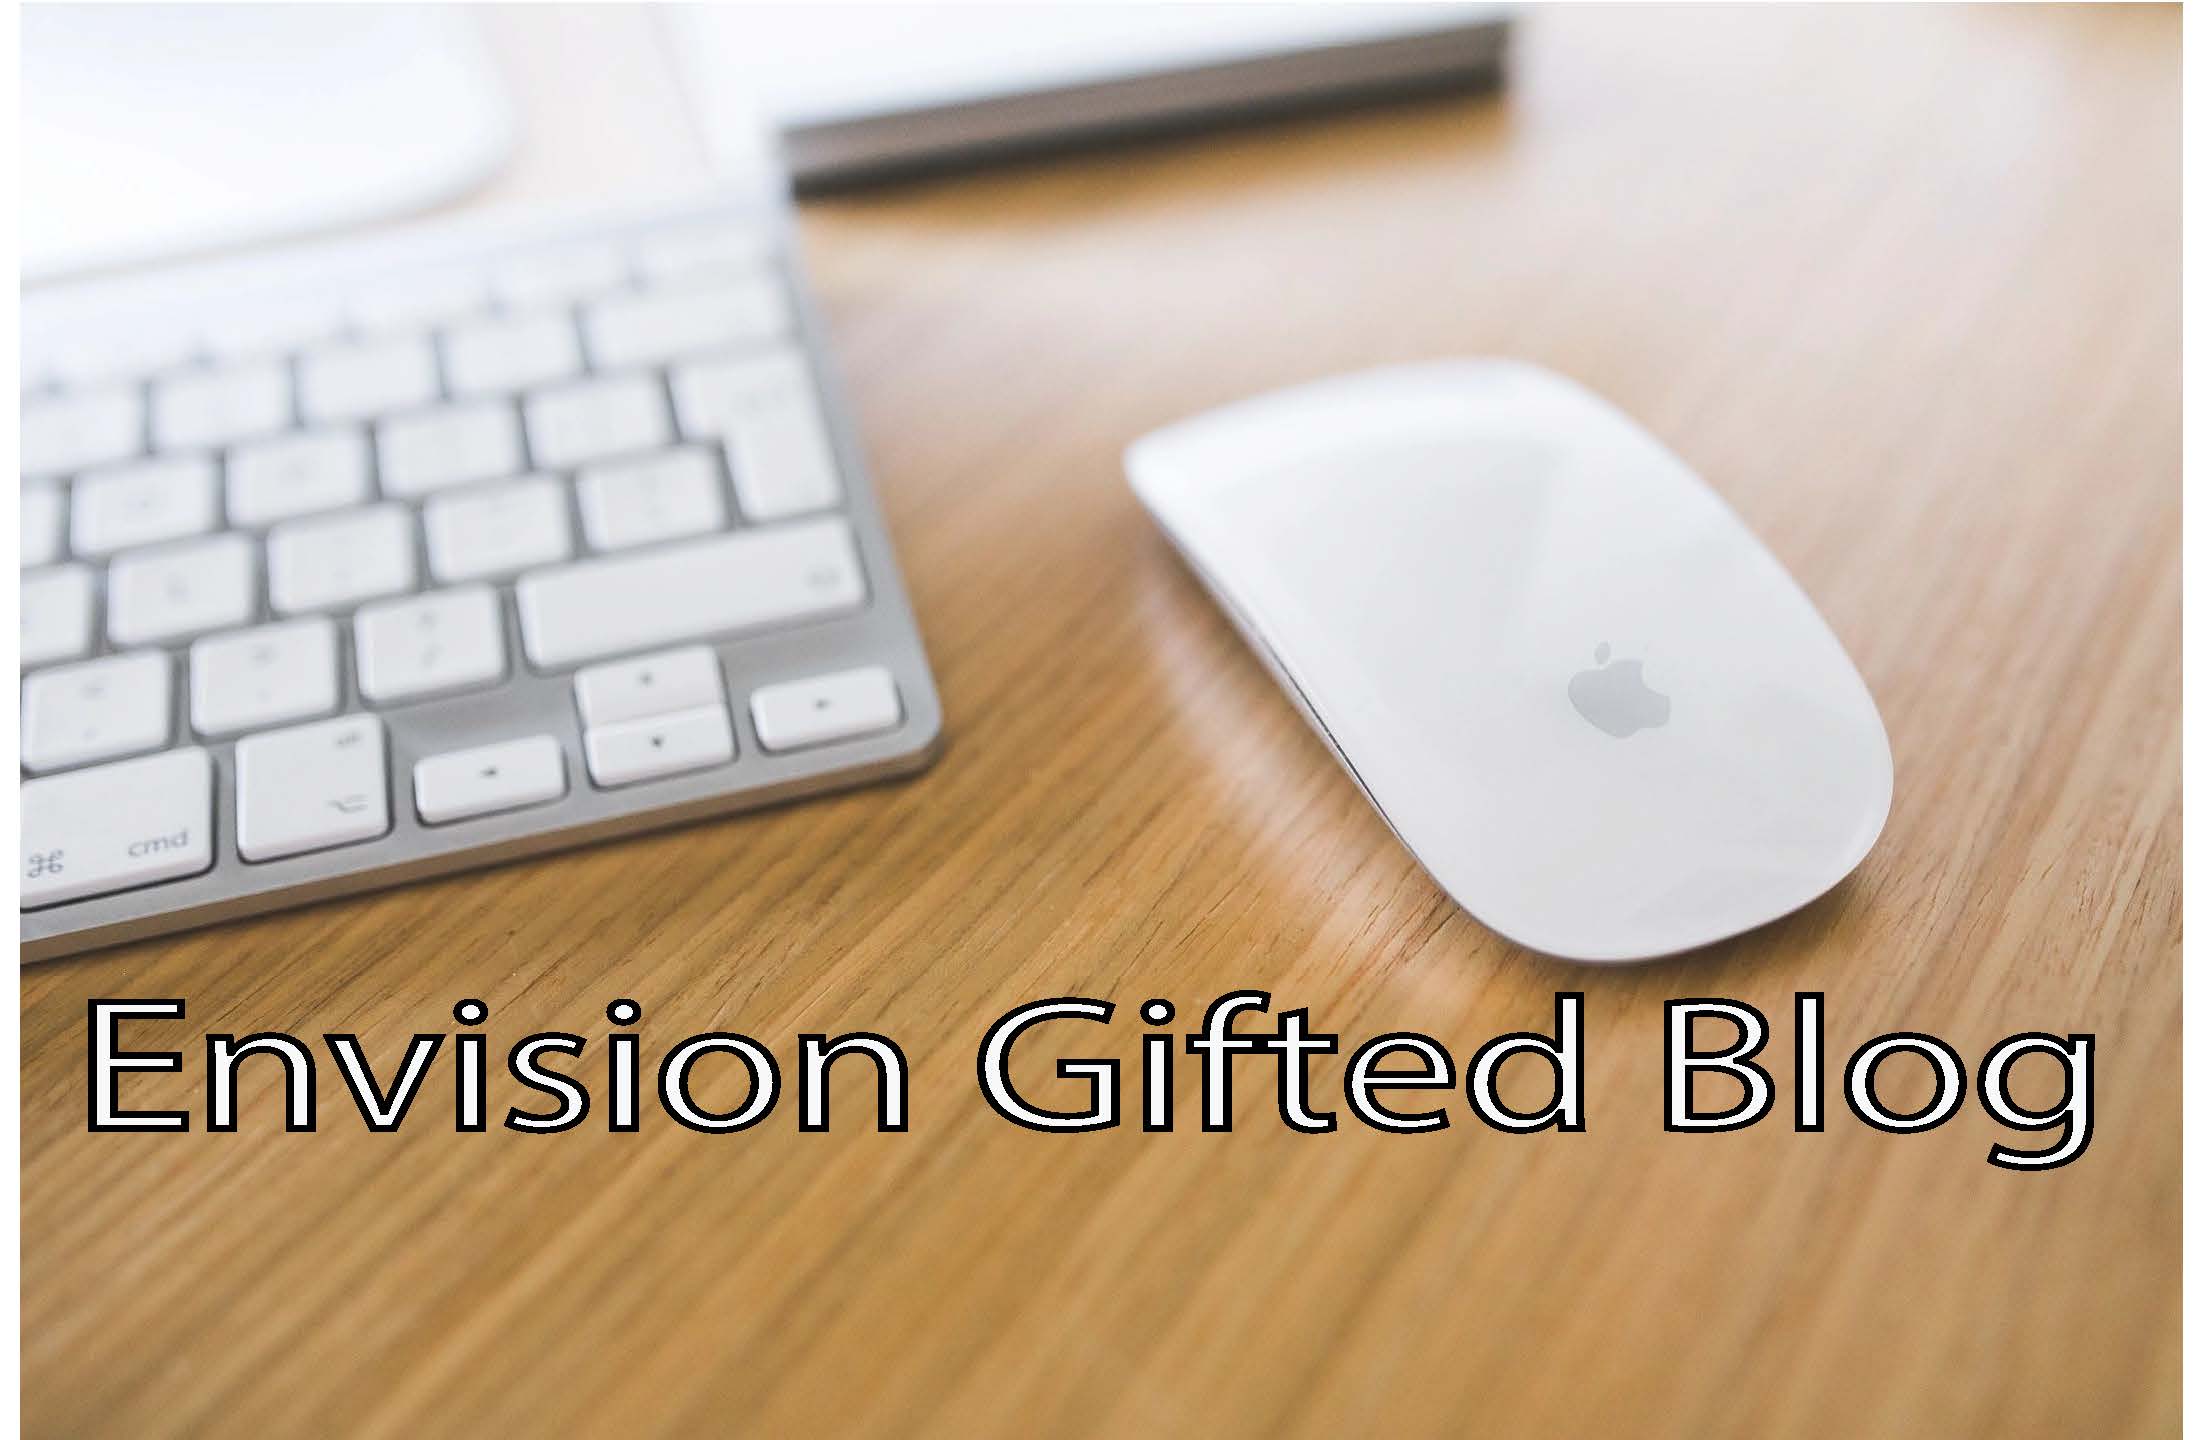 Envision Gifted Blog